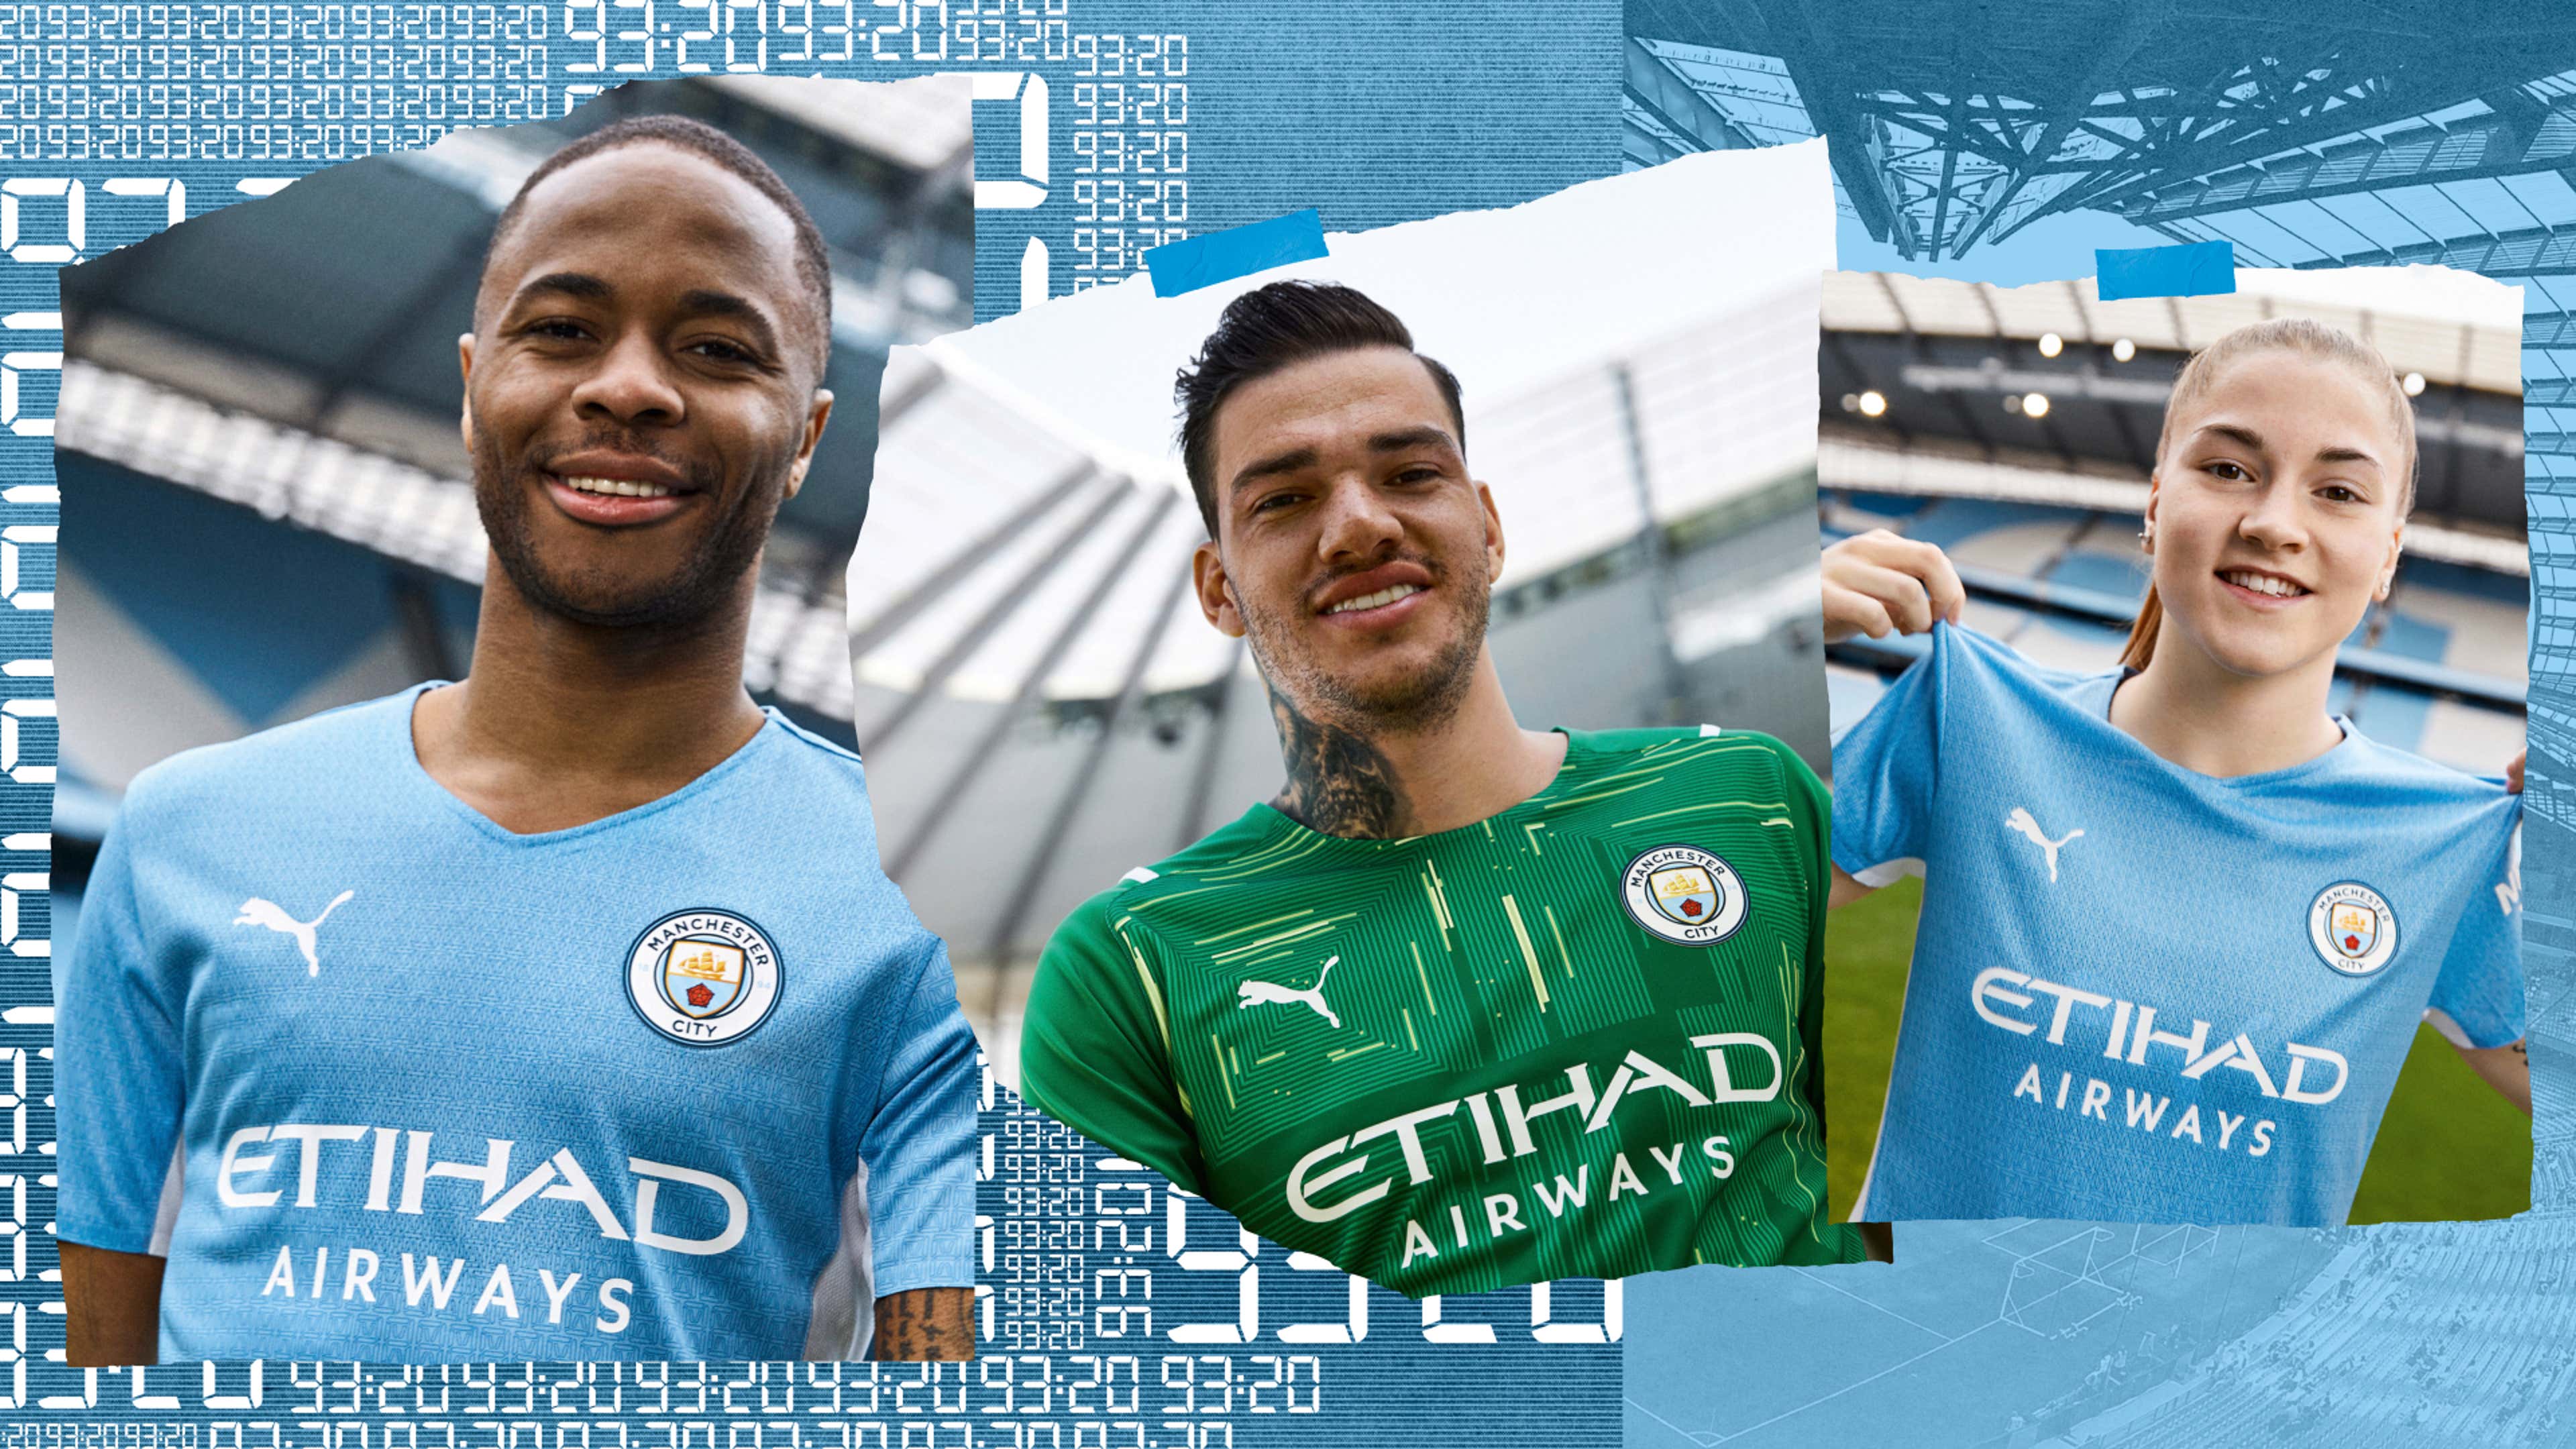 Jersey design took two years' - Here's how Man City's new jersey